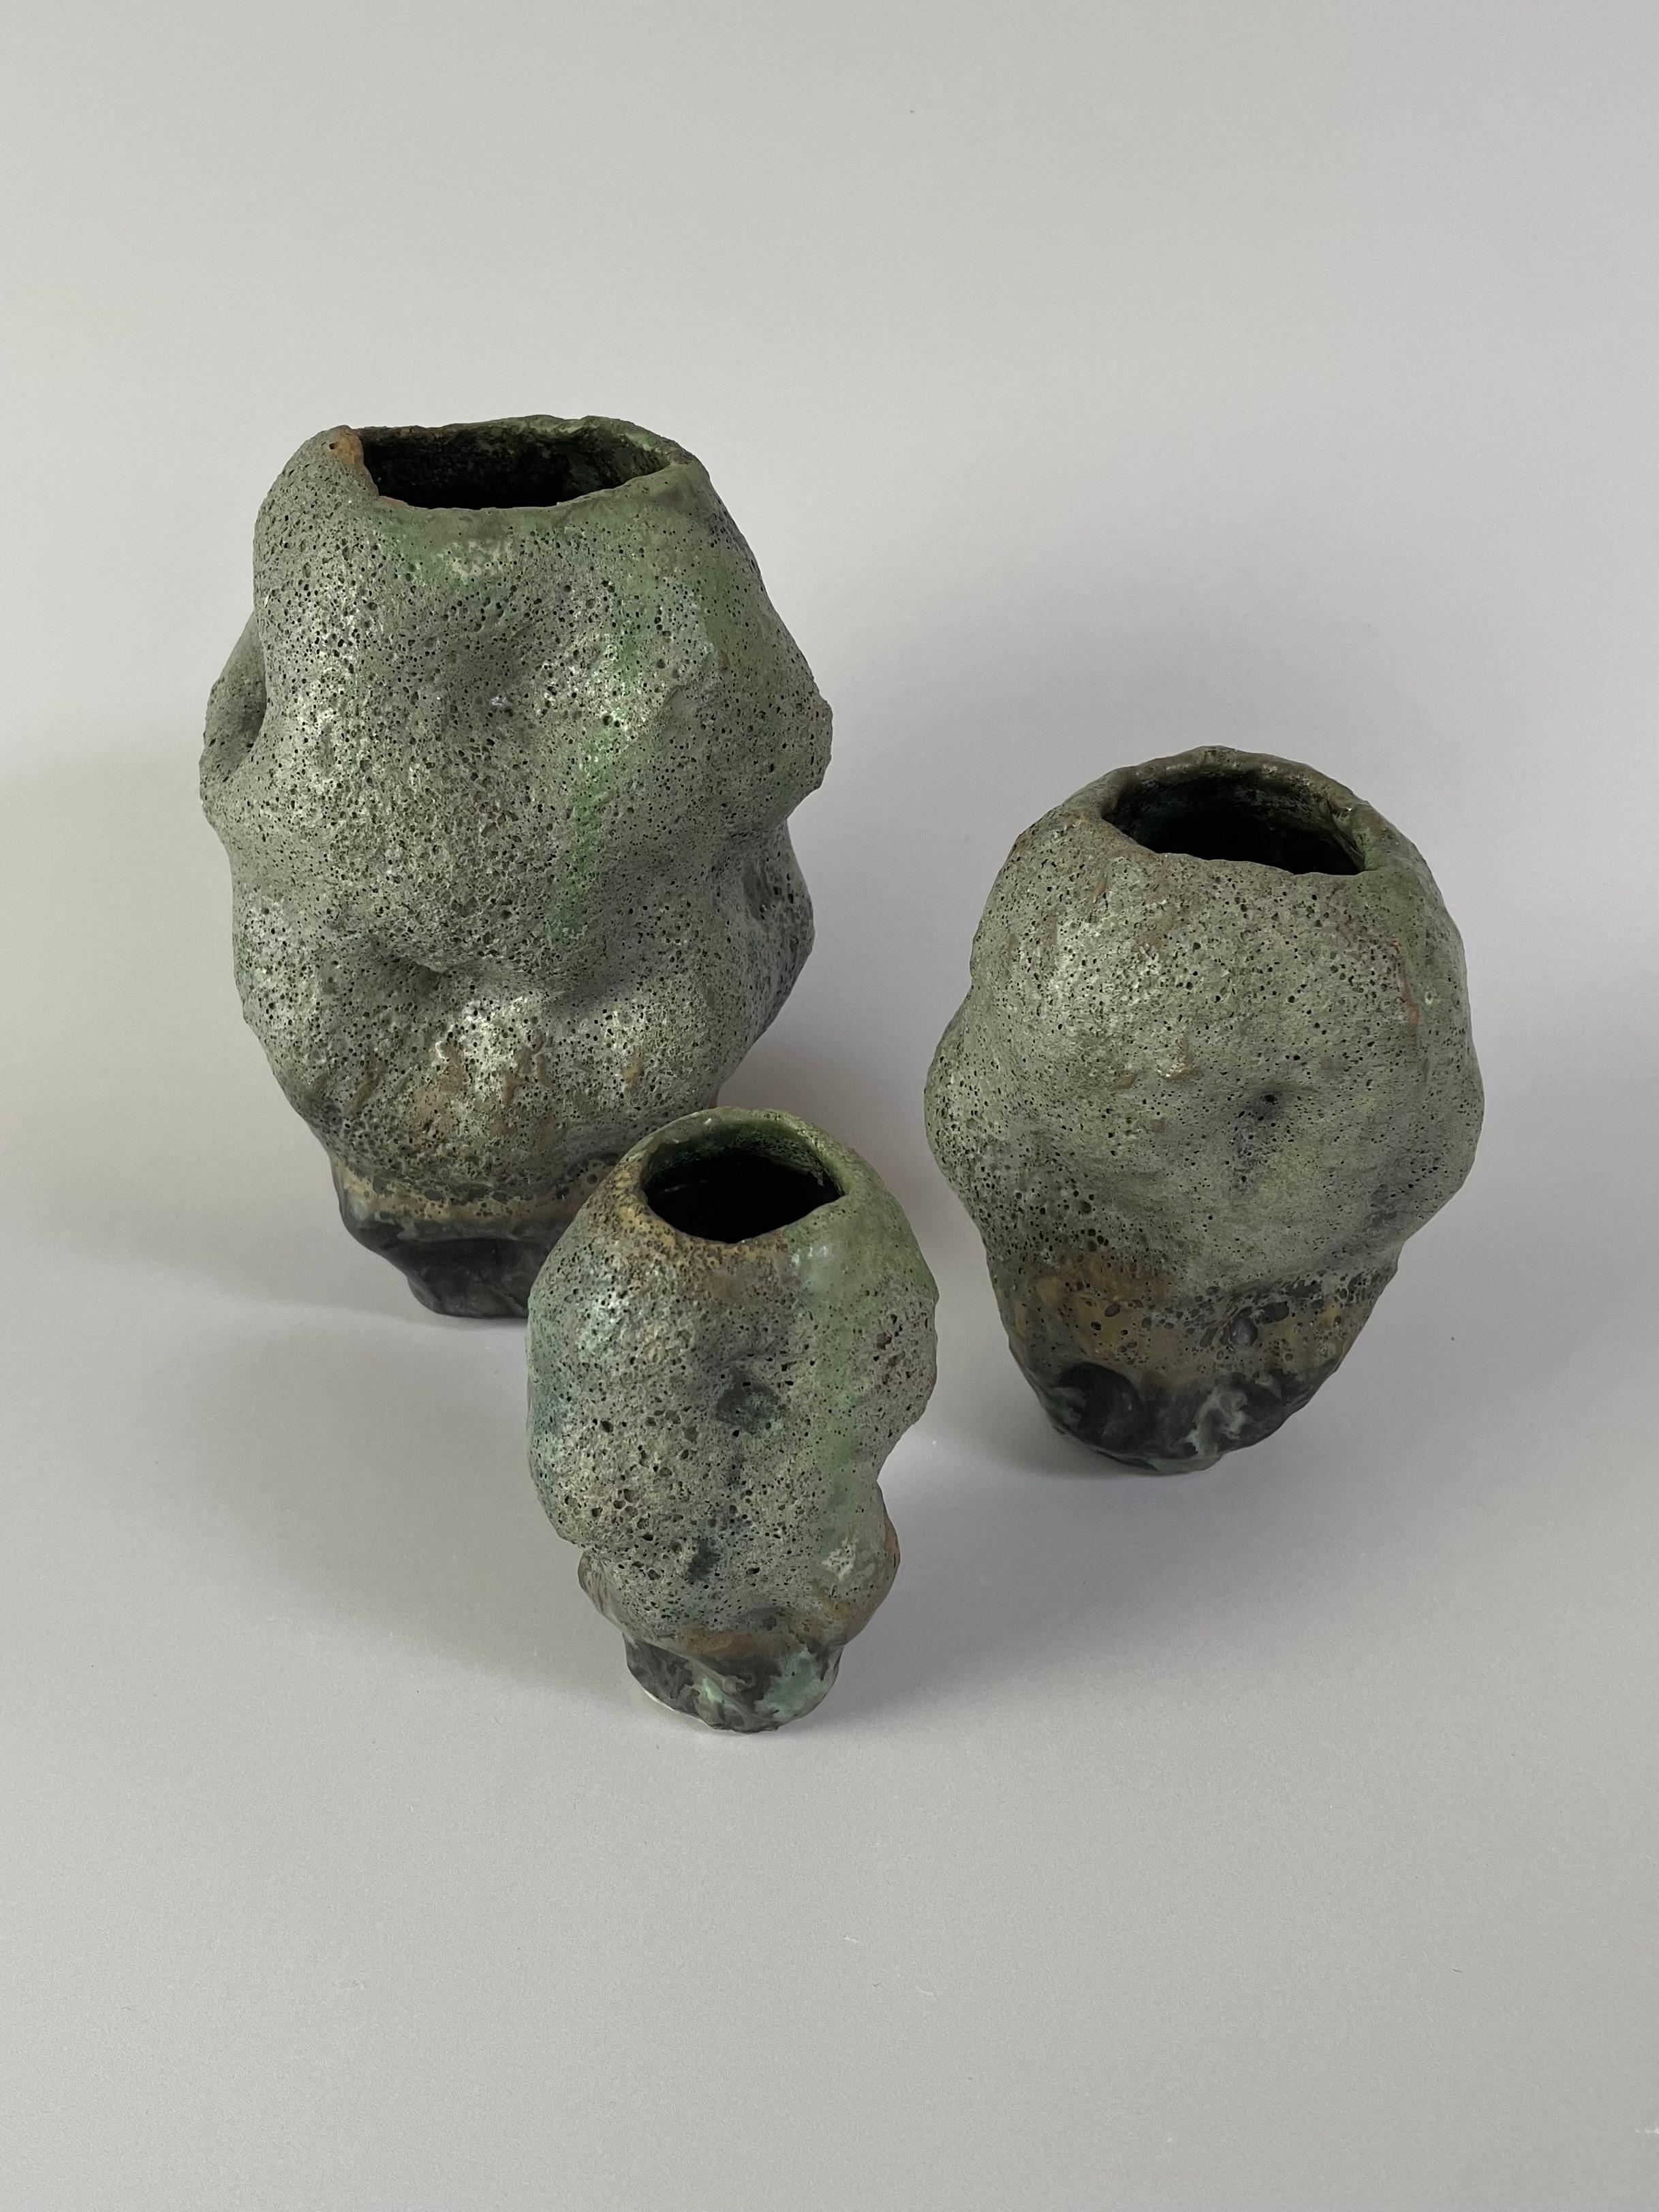 These three ceramic, boulder vases are an important piece of my work. I was making coil ceramic vases, and these morphed into more of an organic, textural surface. My pieces now have evolved from these pieces, where I use the same form, but pinch